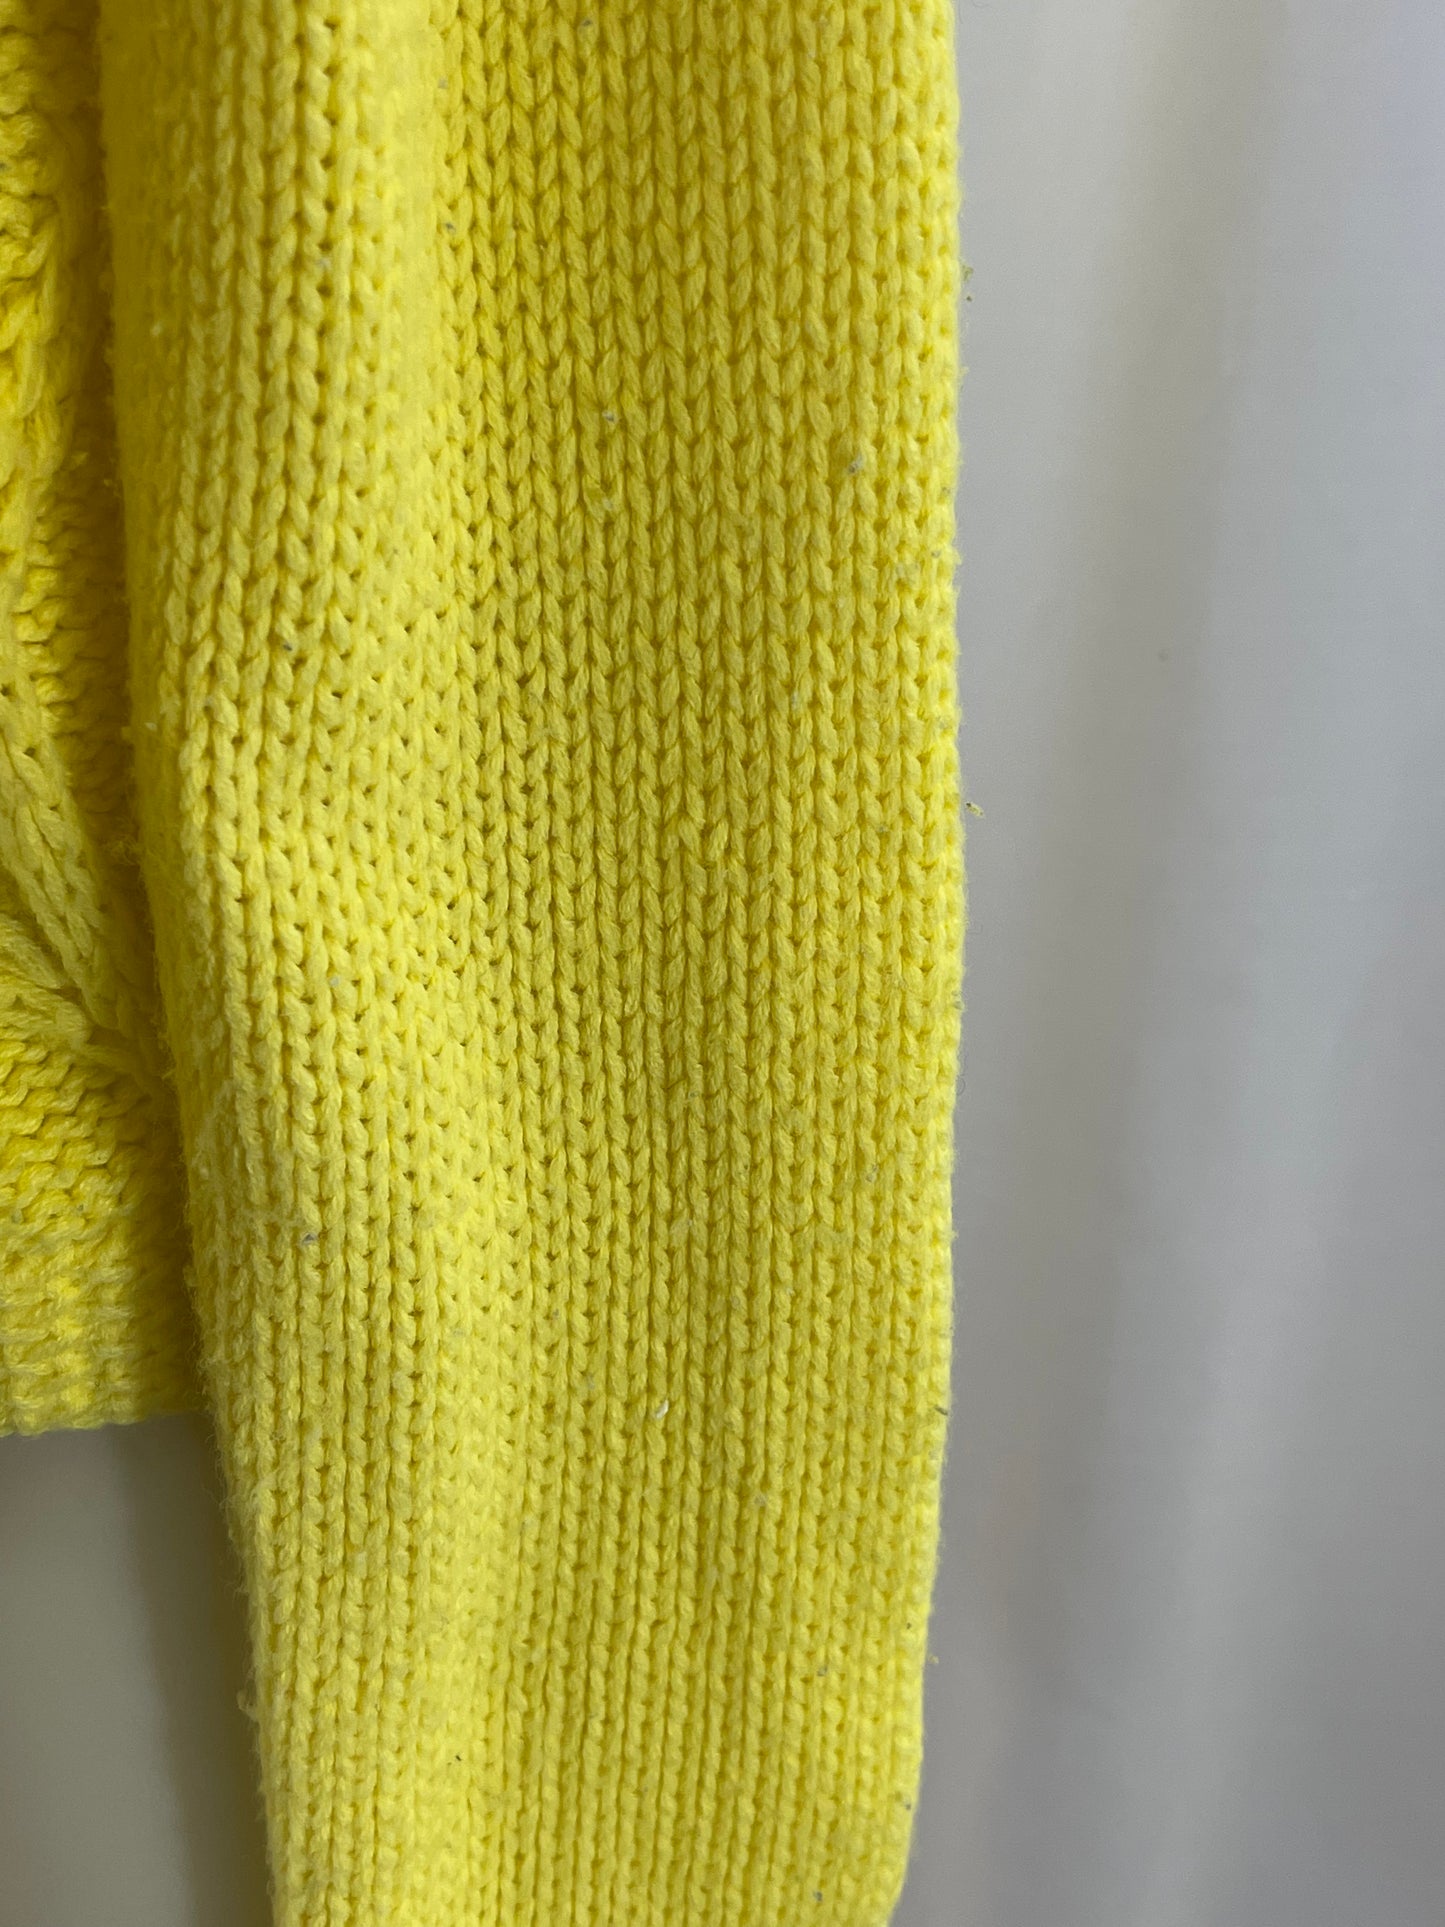 Acrylic Yellow Cable Knit Cardigan